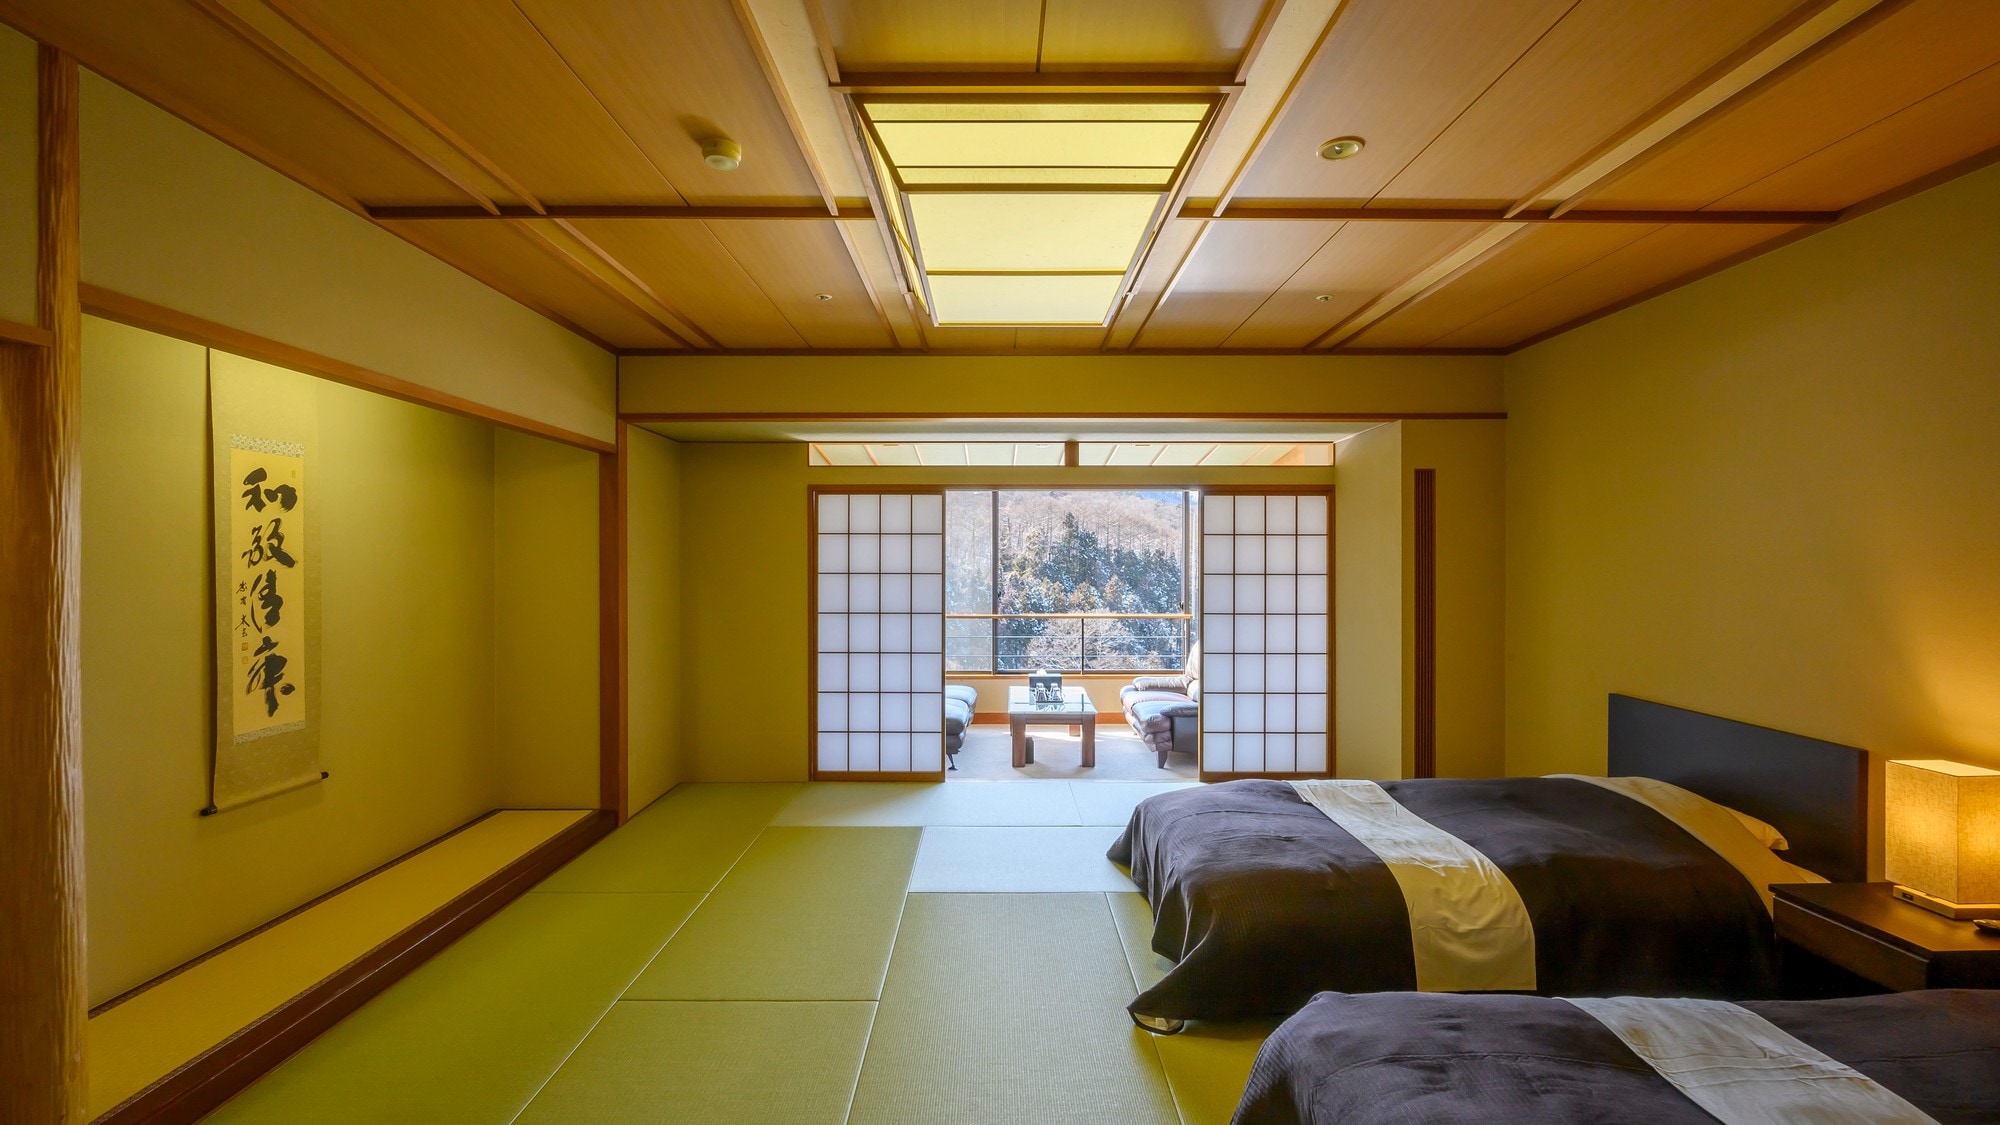 Senjukan Basic Japanese bed room with 12.5 tatami mats. Futons will be prepared for 3 people.